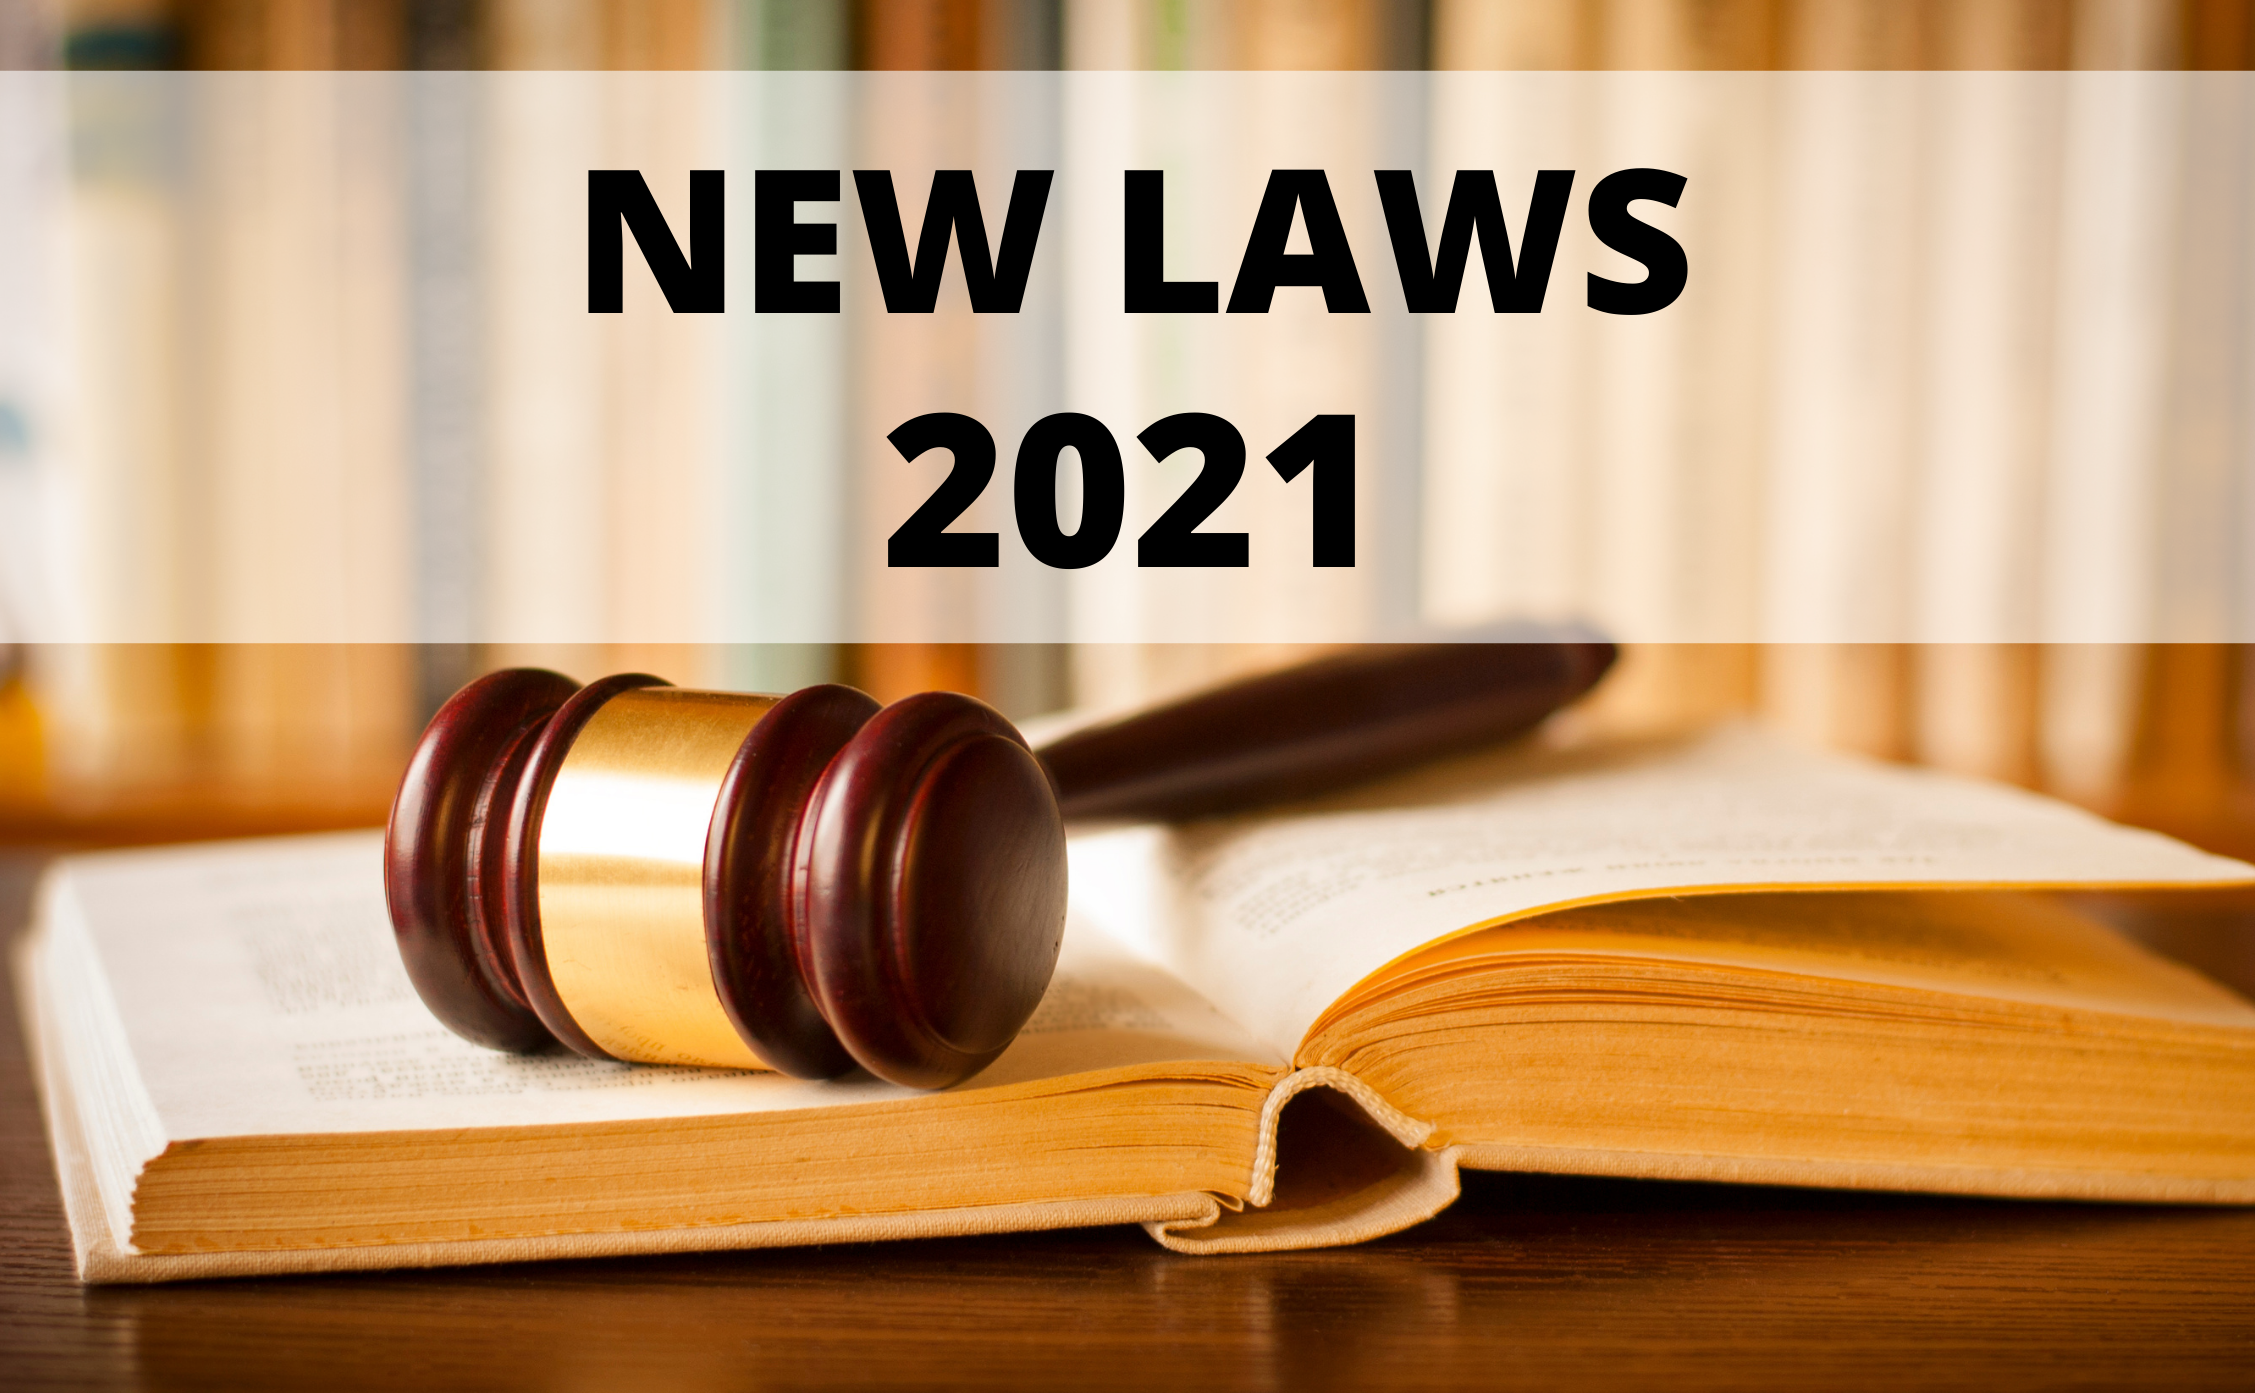 new laws 2021